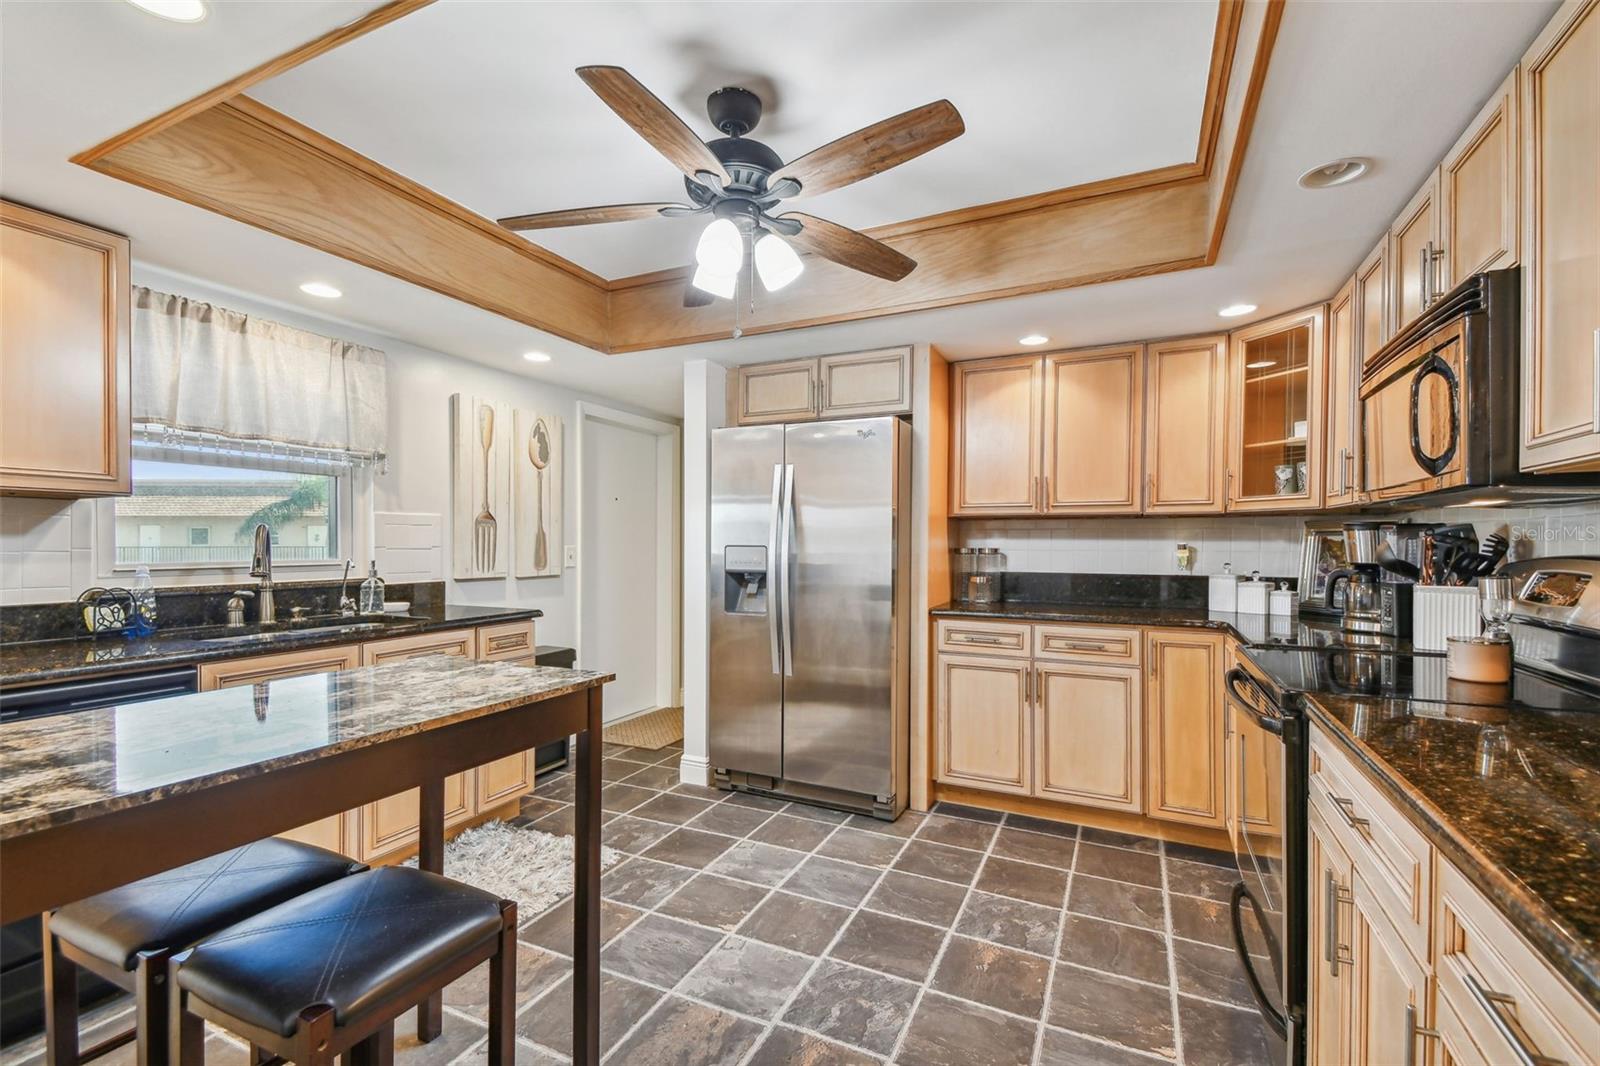 Kitchen with Maple cabinets and Granite counter tops